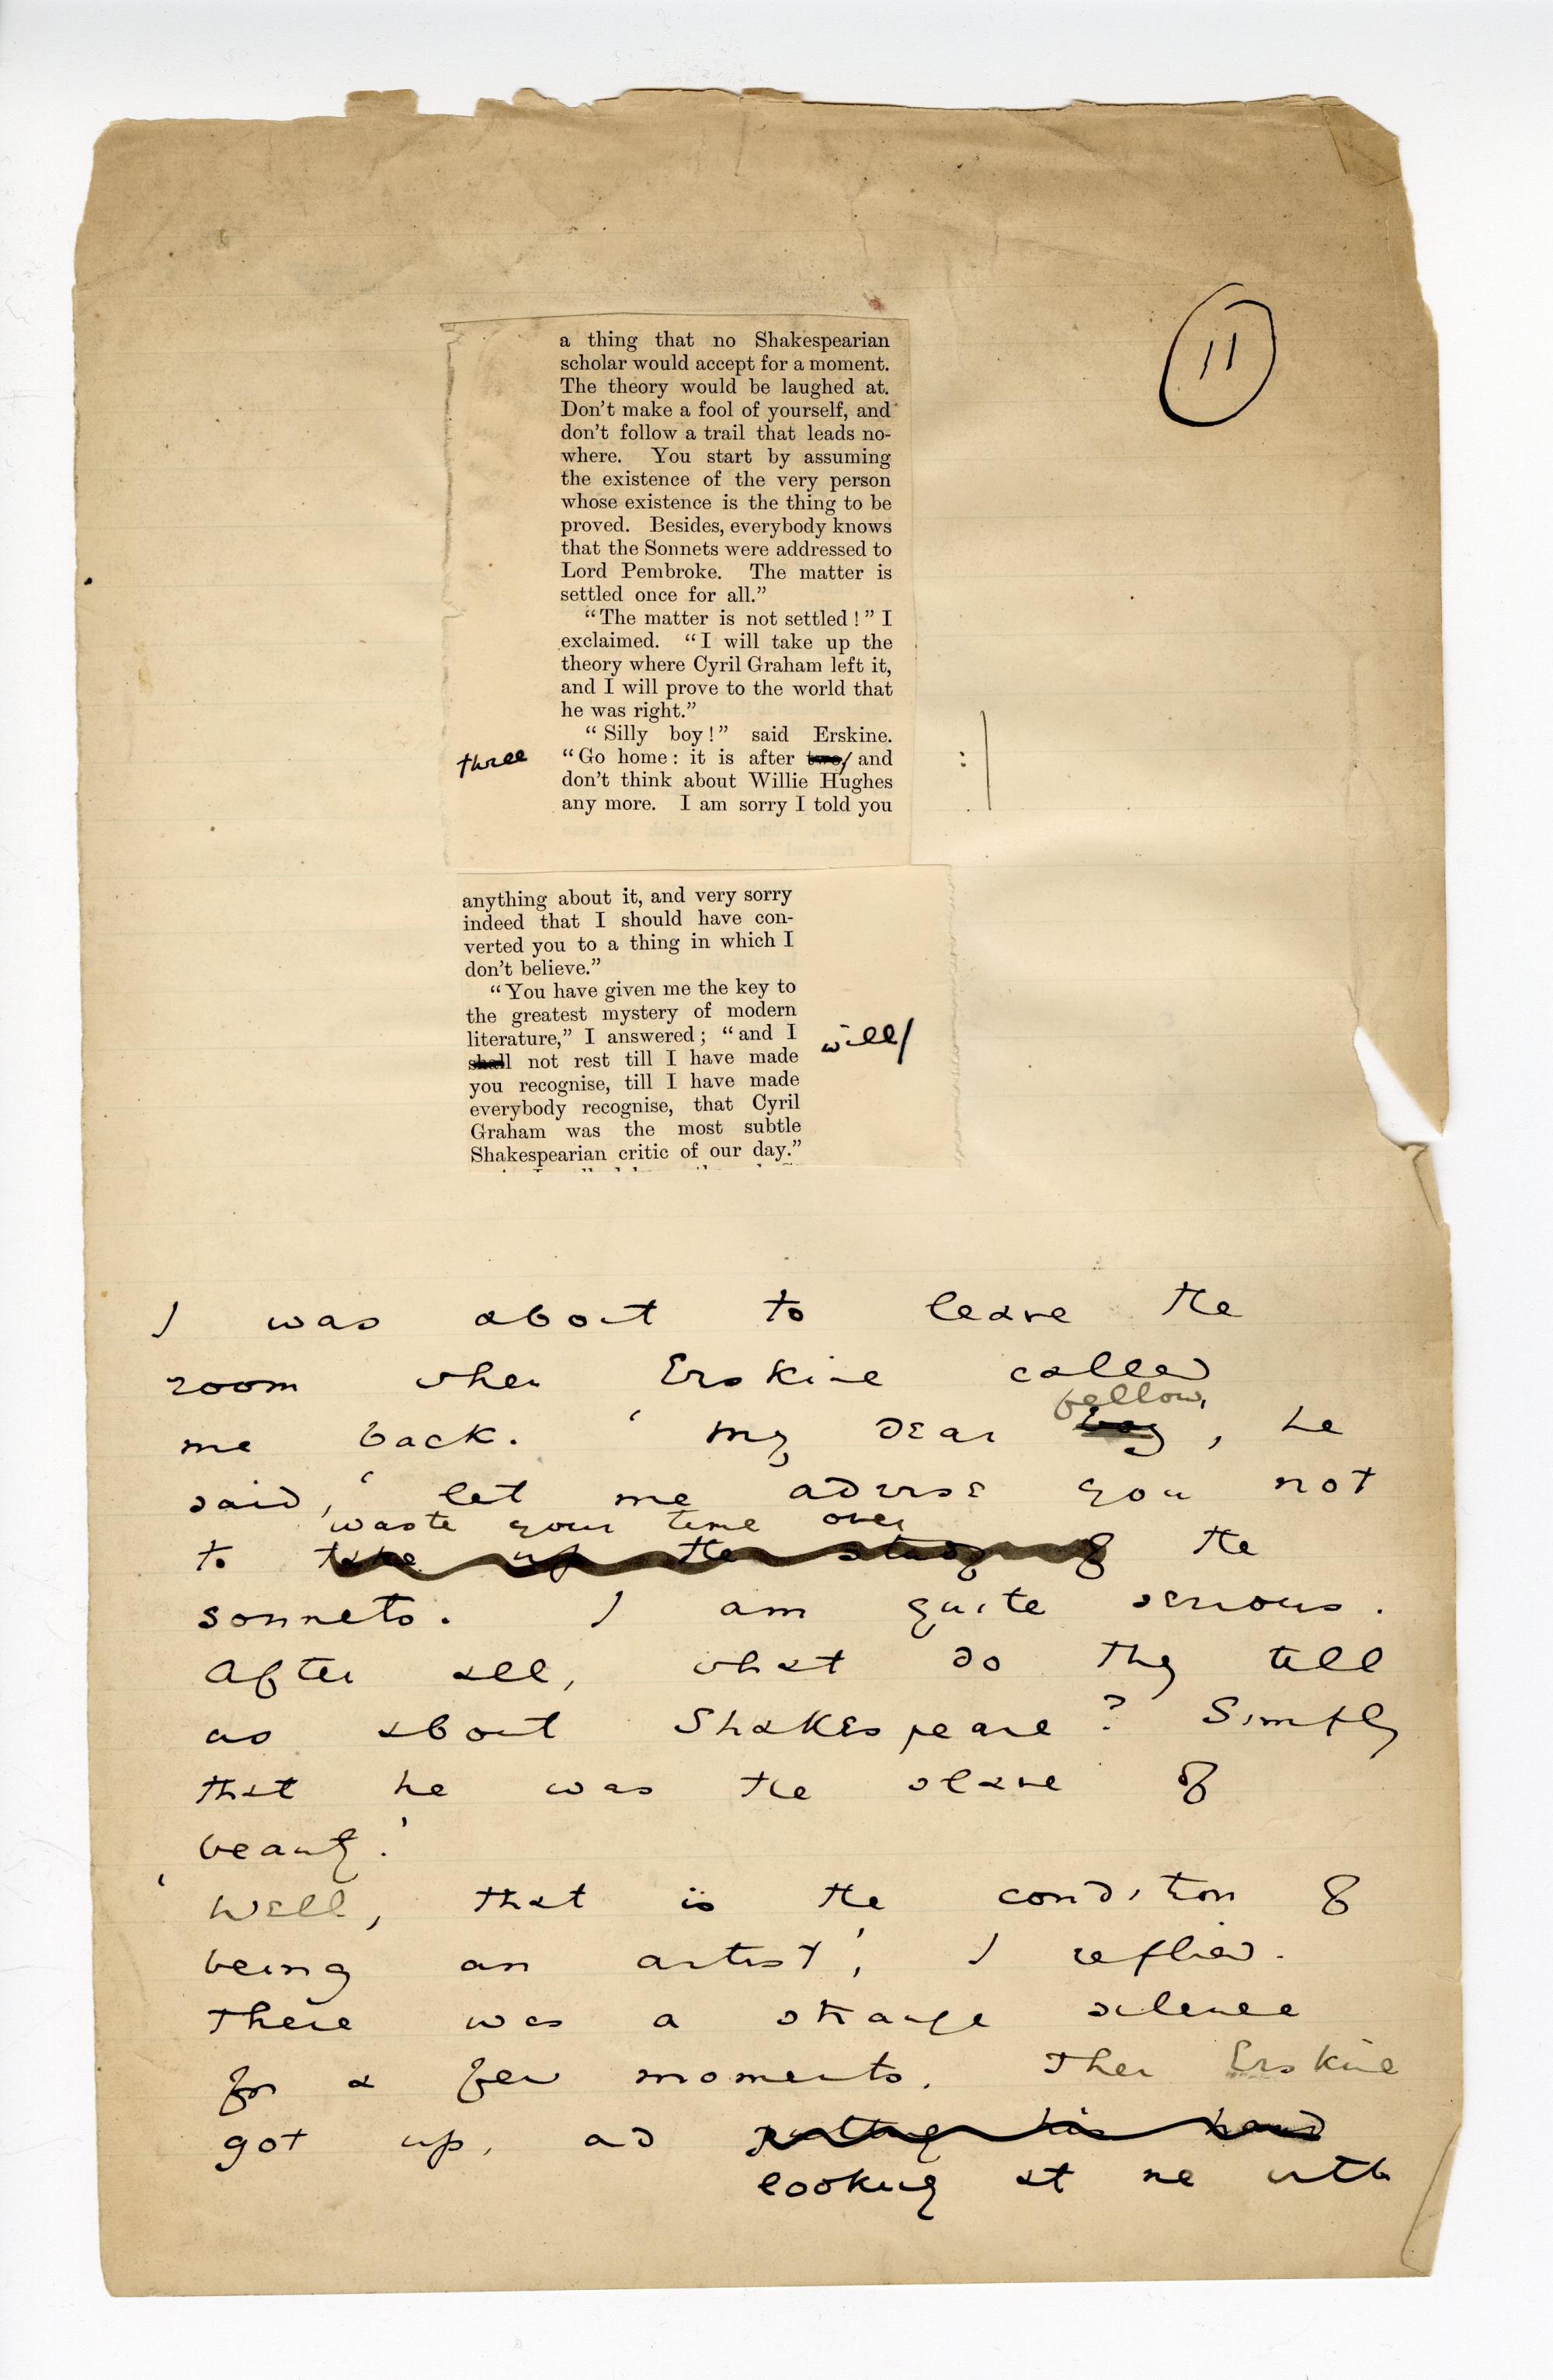 Folio 11 contains two cutouts from the upper portion of p. 11 of the Blackwood's 1889 printing glued down into a single column onto a notebook page. Wilde makes annotations on the Blackwood's cutouts and a lengthy addition below.